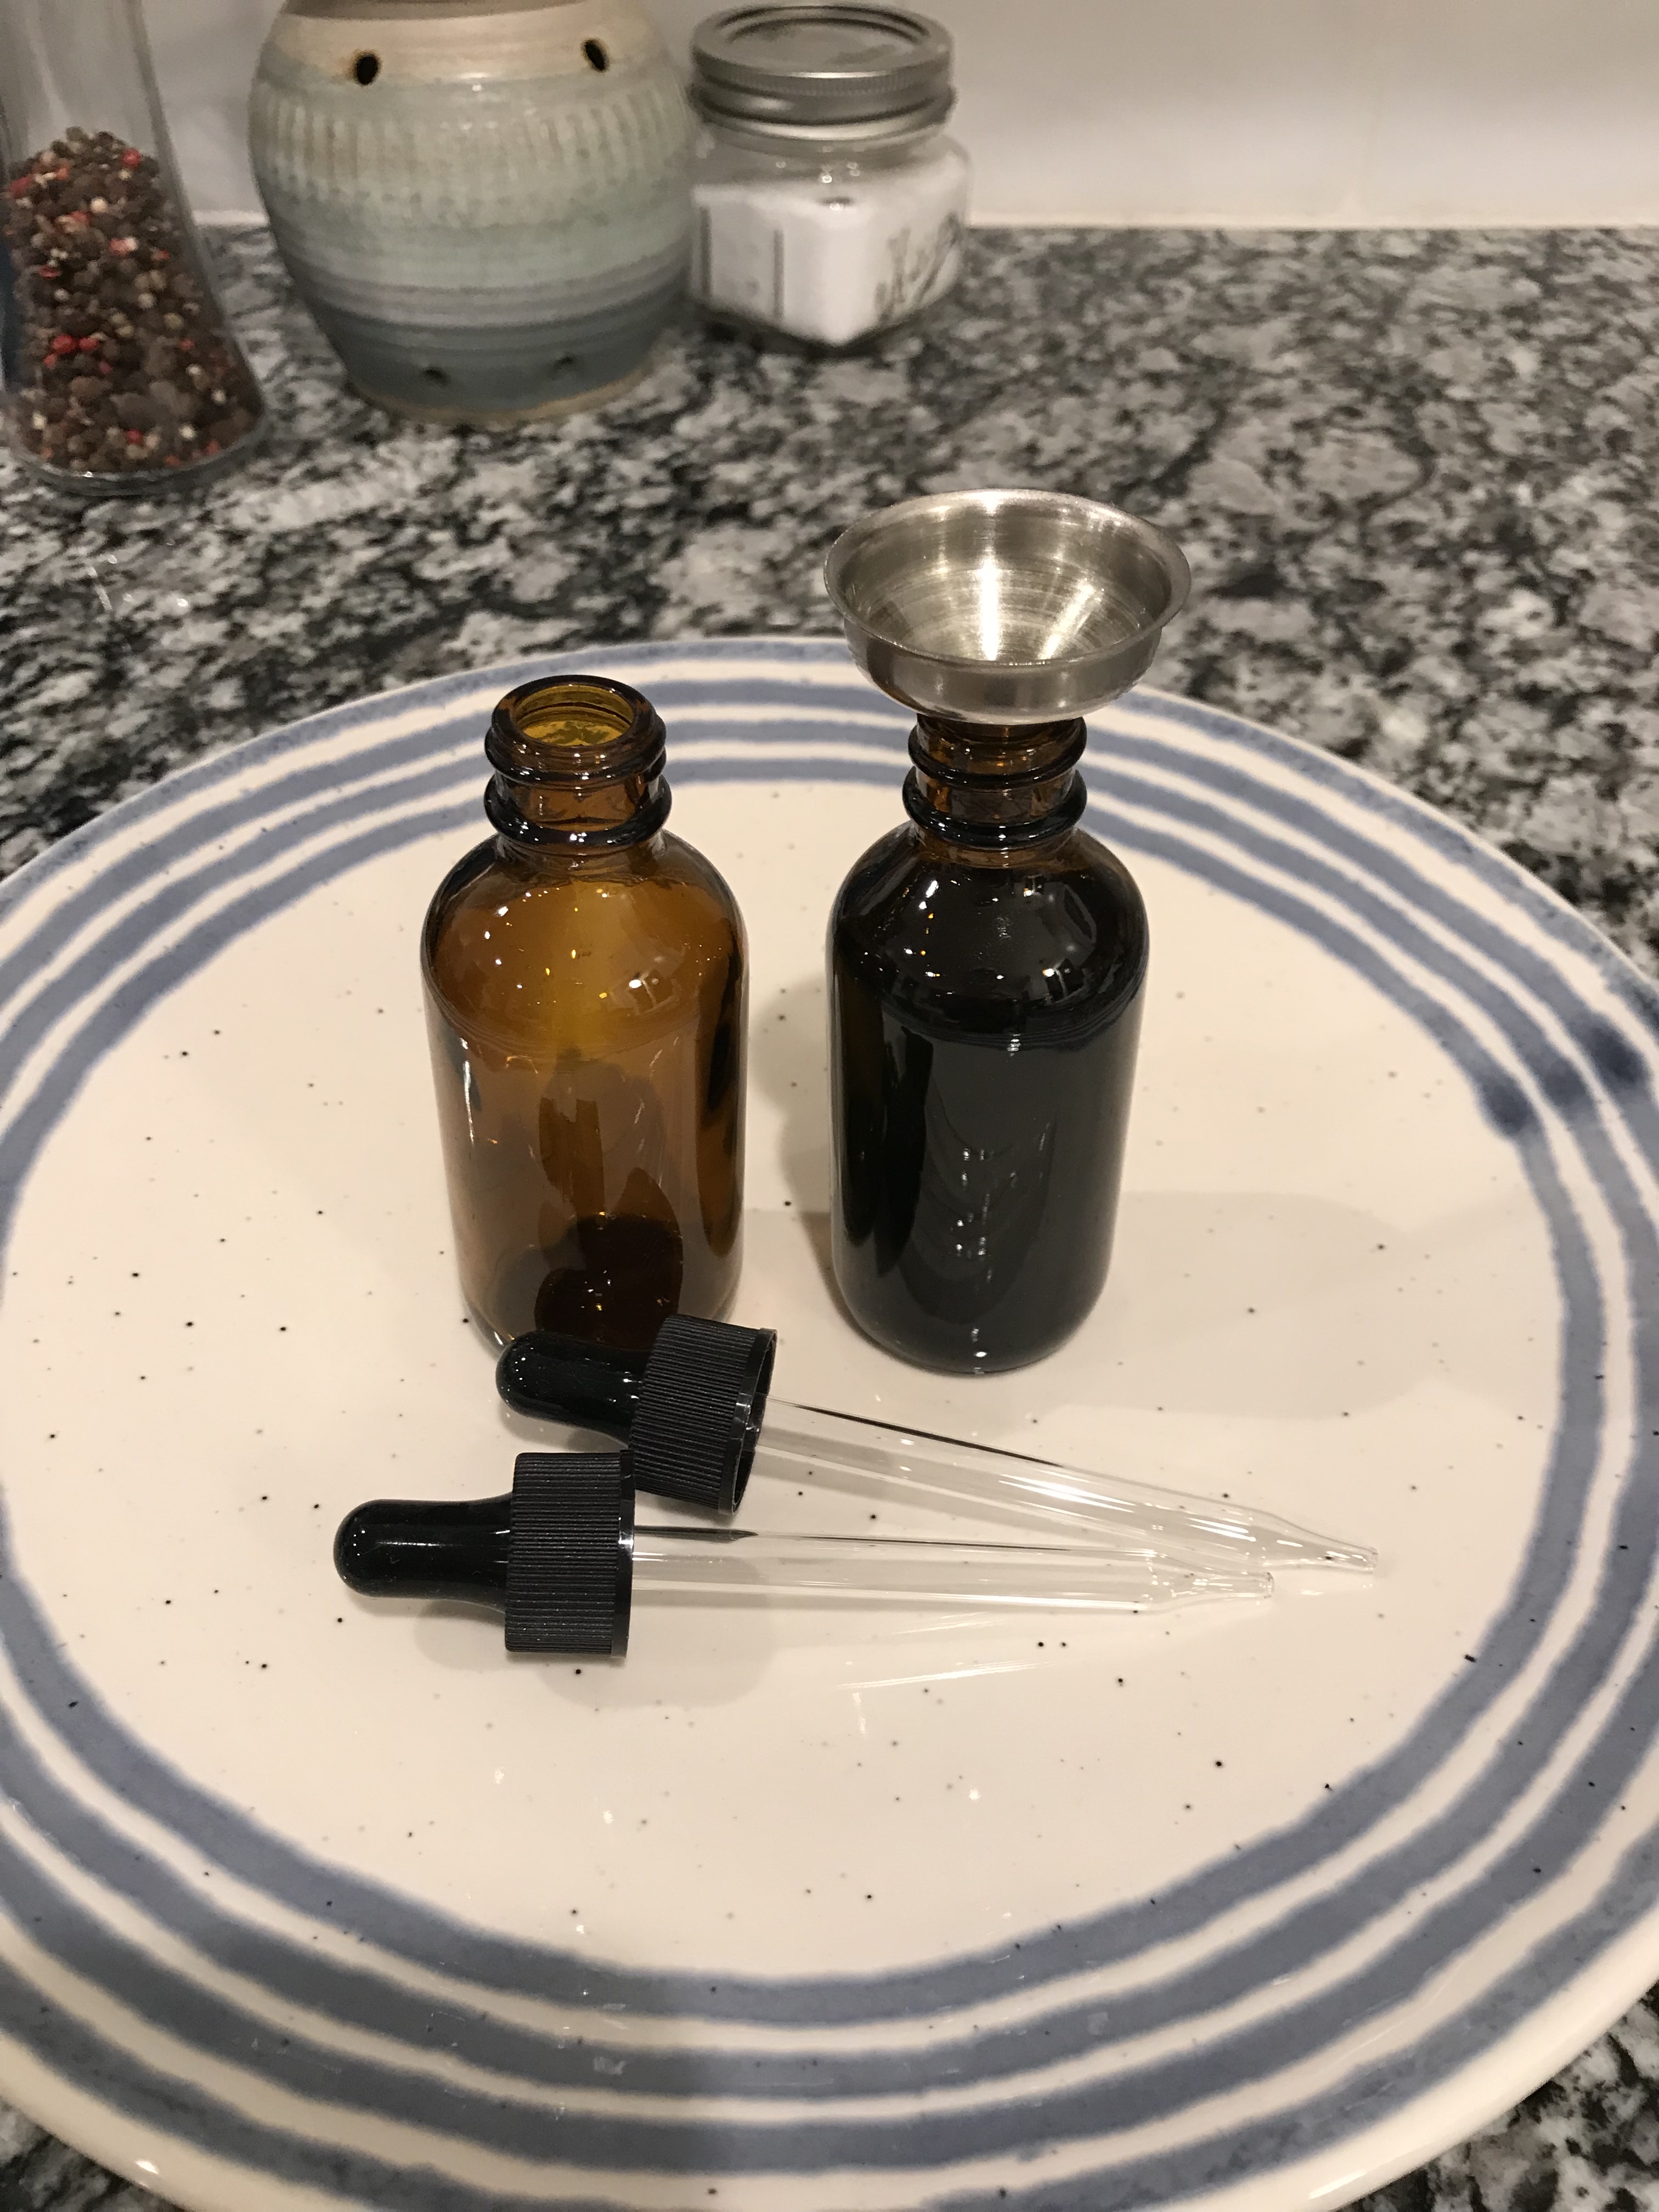 A tiny funnel is very useful when pouring the infused coconut oil into a glass bottle with dropper. Notice the plate beneath the bottles, in case anything spills.